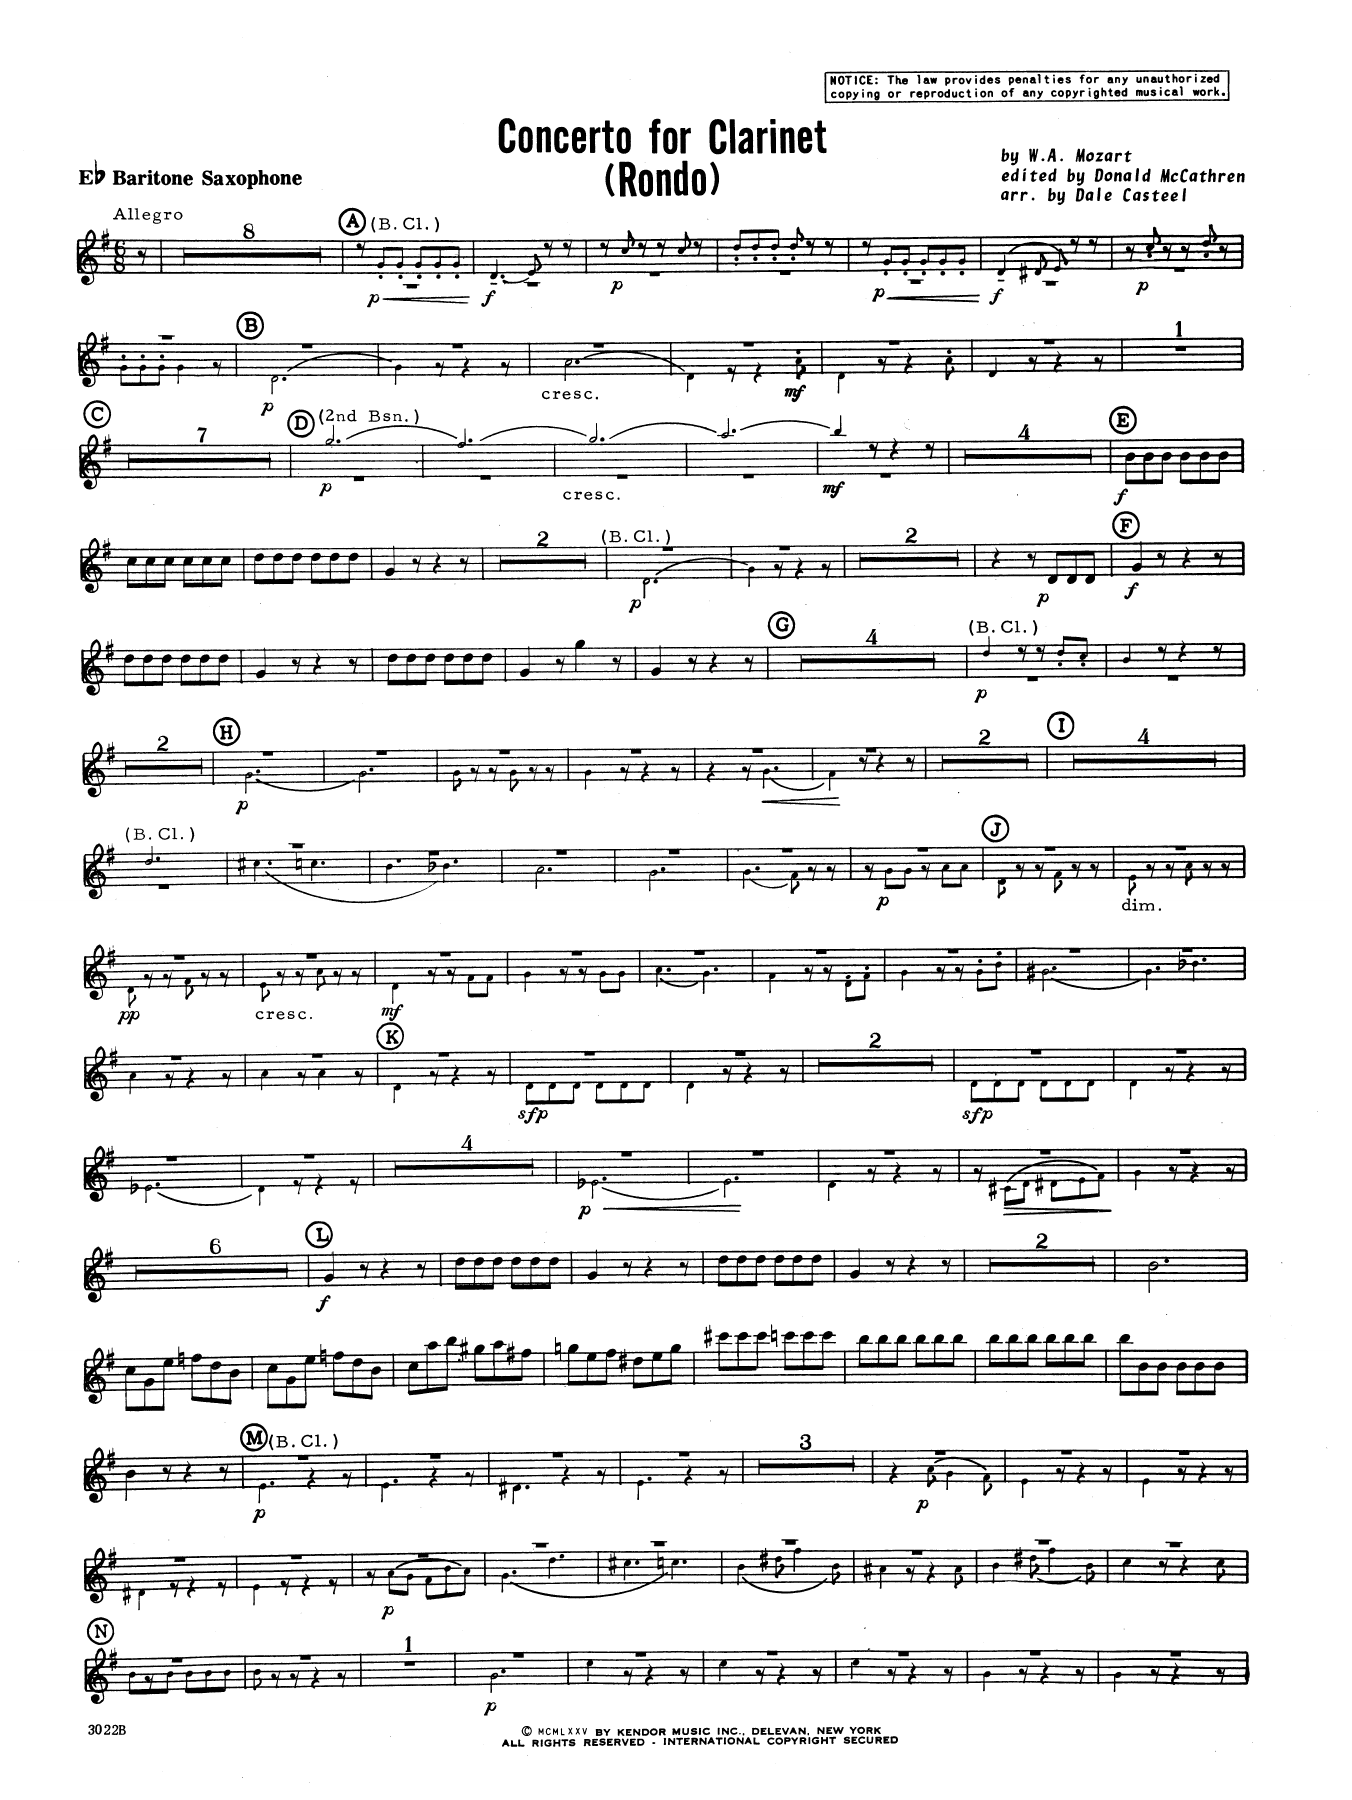 Download Donald McCathren and Dale Casteel Concerto For Clarinet - Rondo (3rd Move Sheet Music